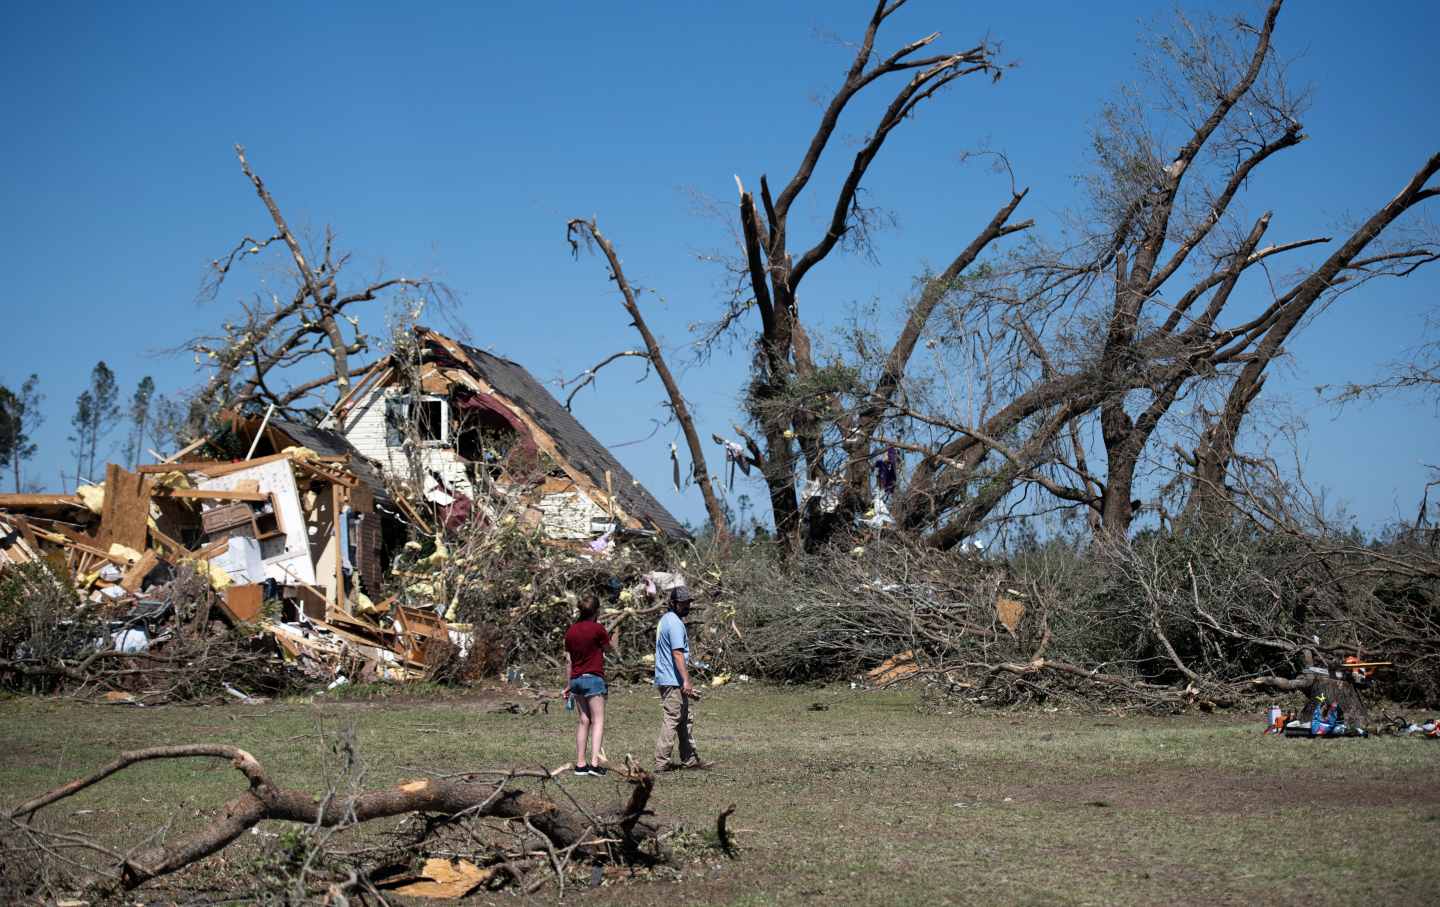 People looking at a destroyed home with trees